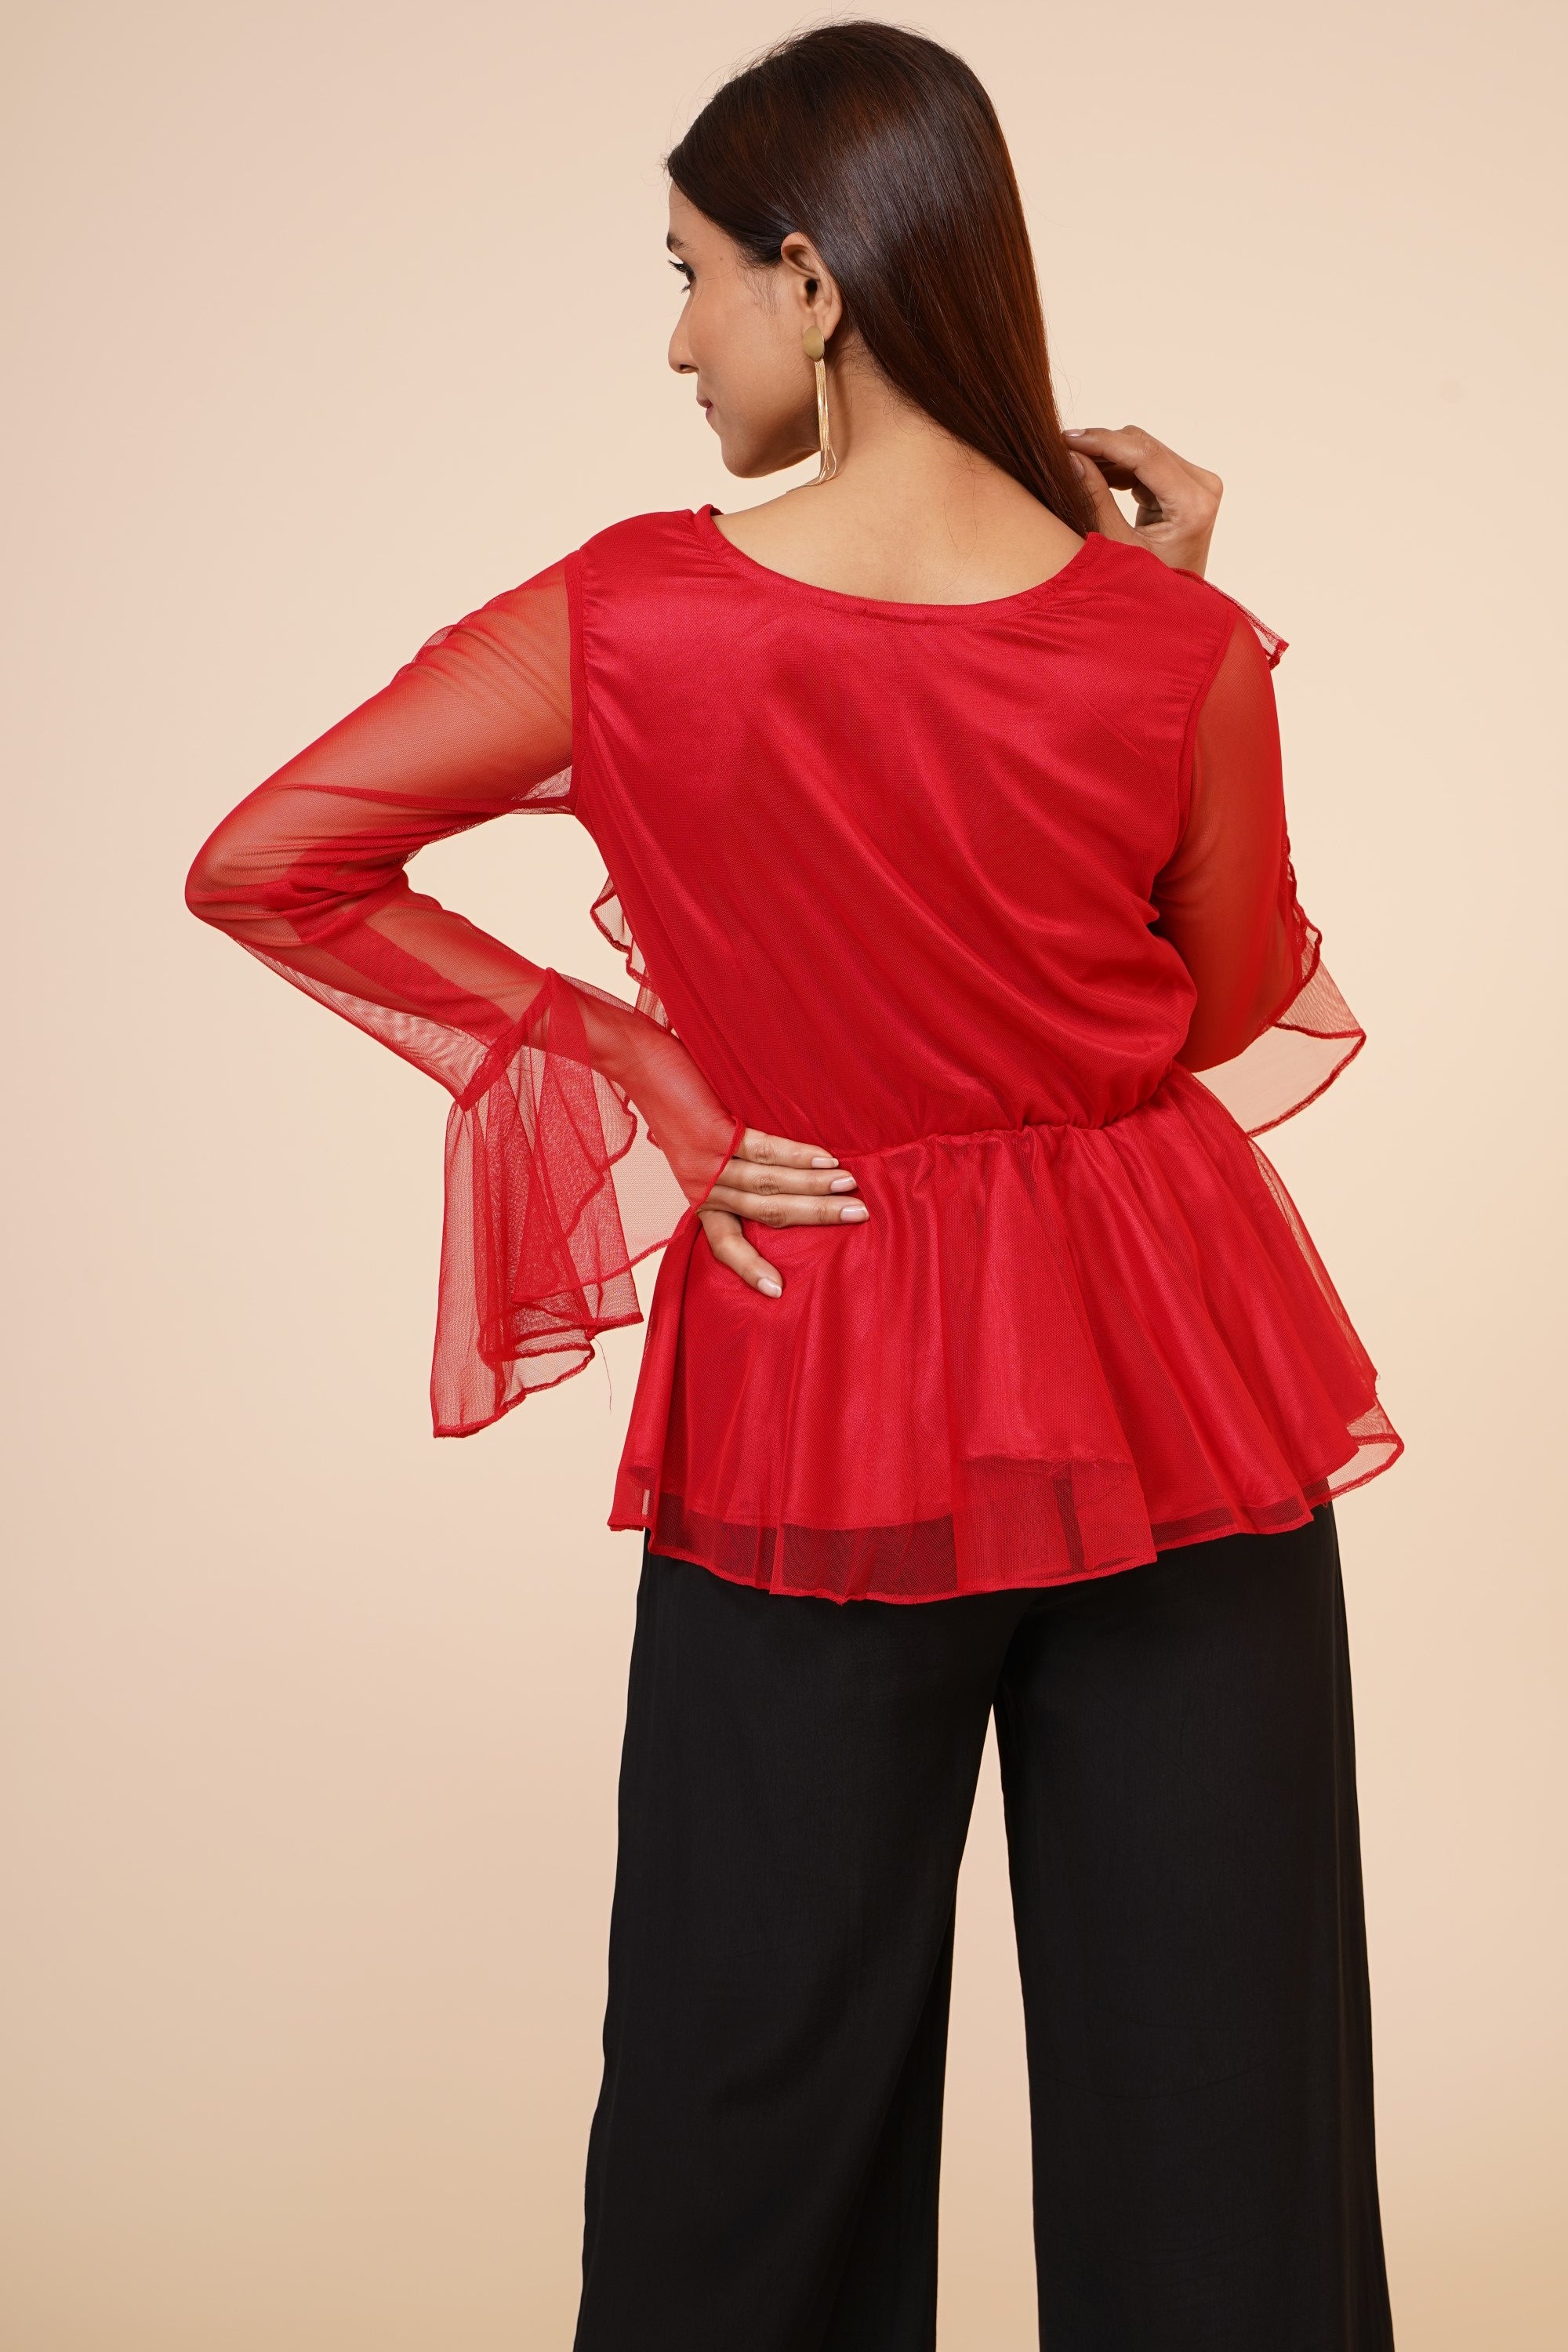 Women's Net Party Long Ruffle Sleeves Top In Red - MIRACOLOS by Ruchi